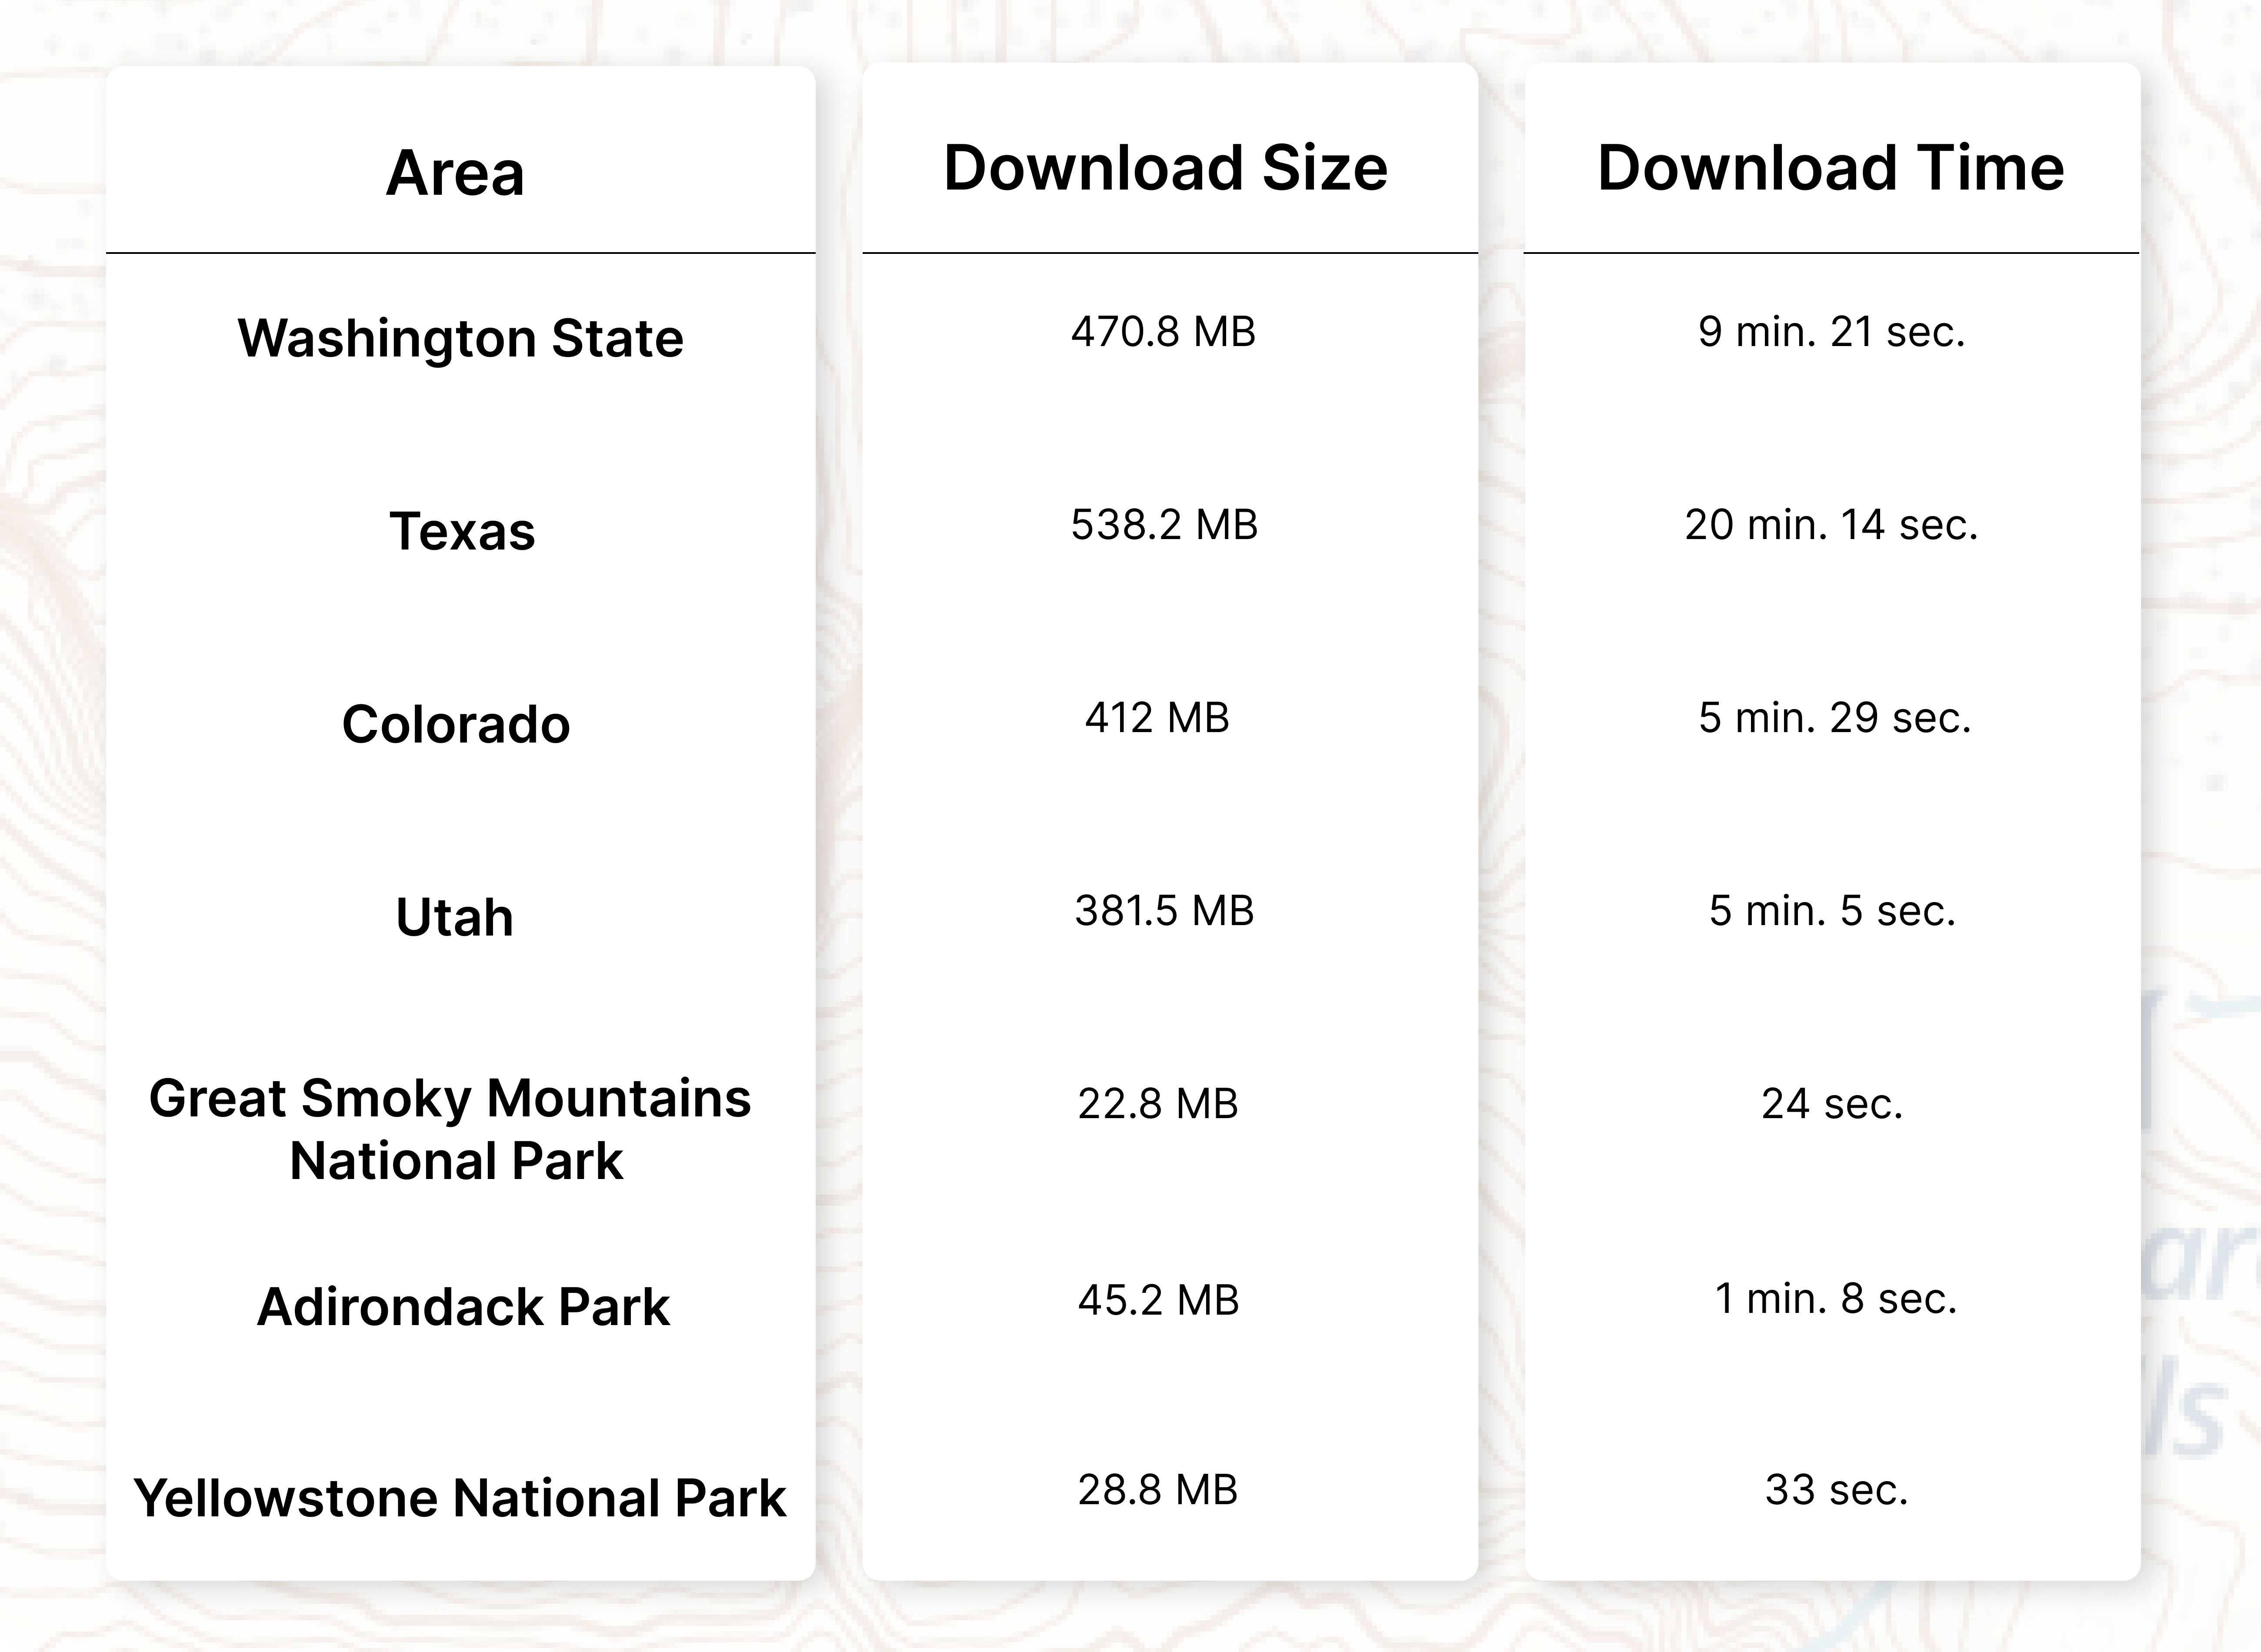 A screenshot shoes download size and speeds for various states.